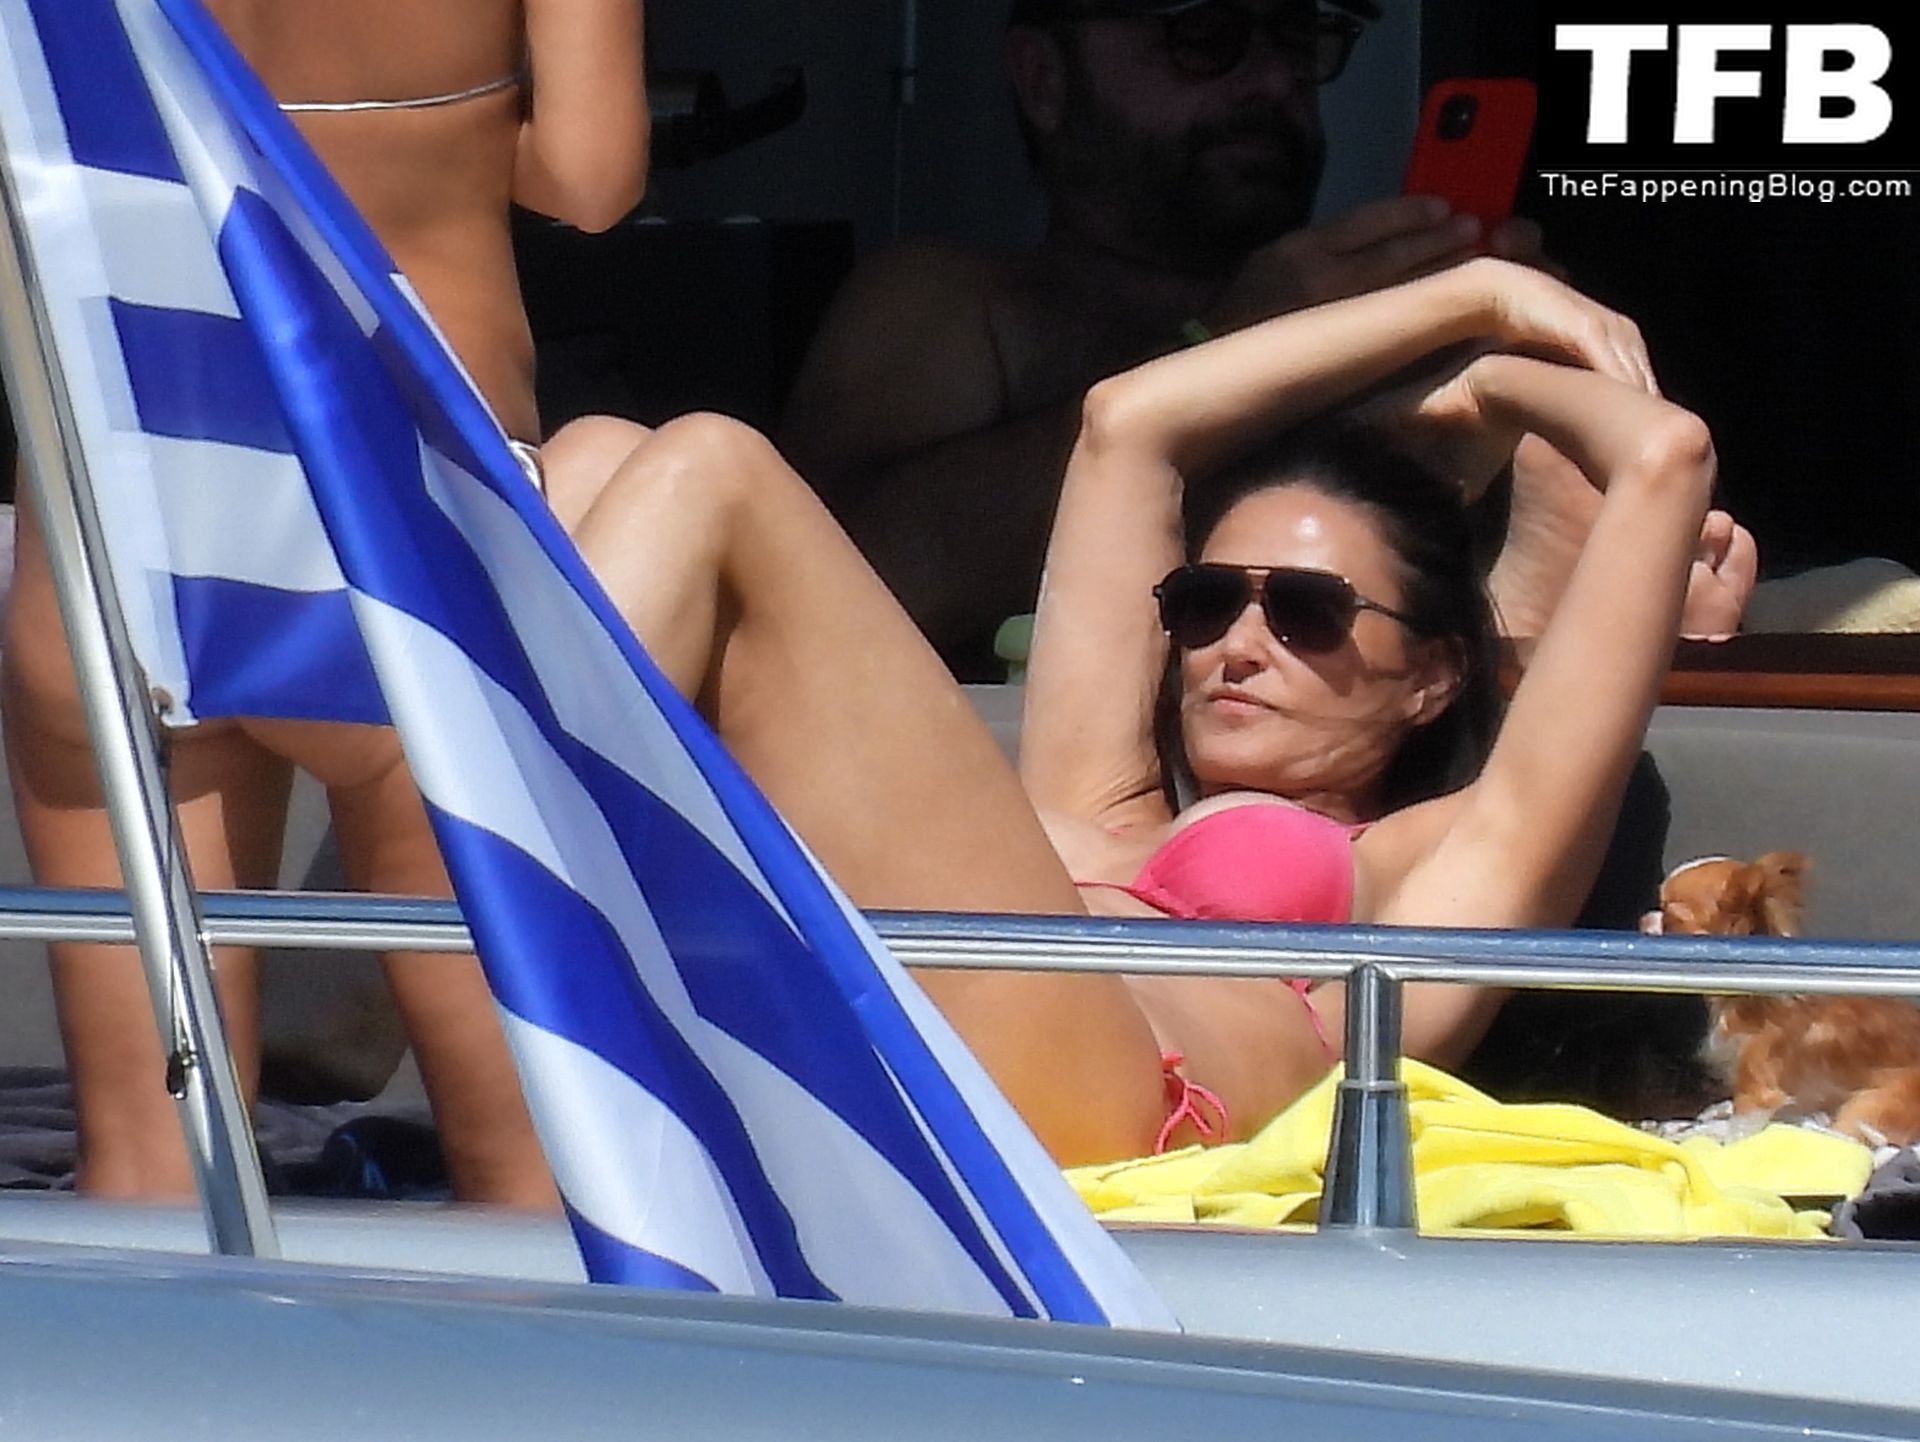 Demi Moore Sexy The Fappening Blog 36 - Demi Moore Looks Sensational at 59 in a Red Bikini on Vacation in Greece (59 Photos)